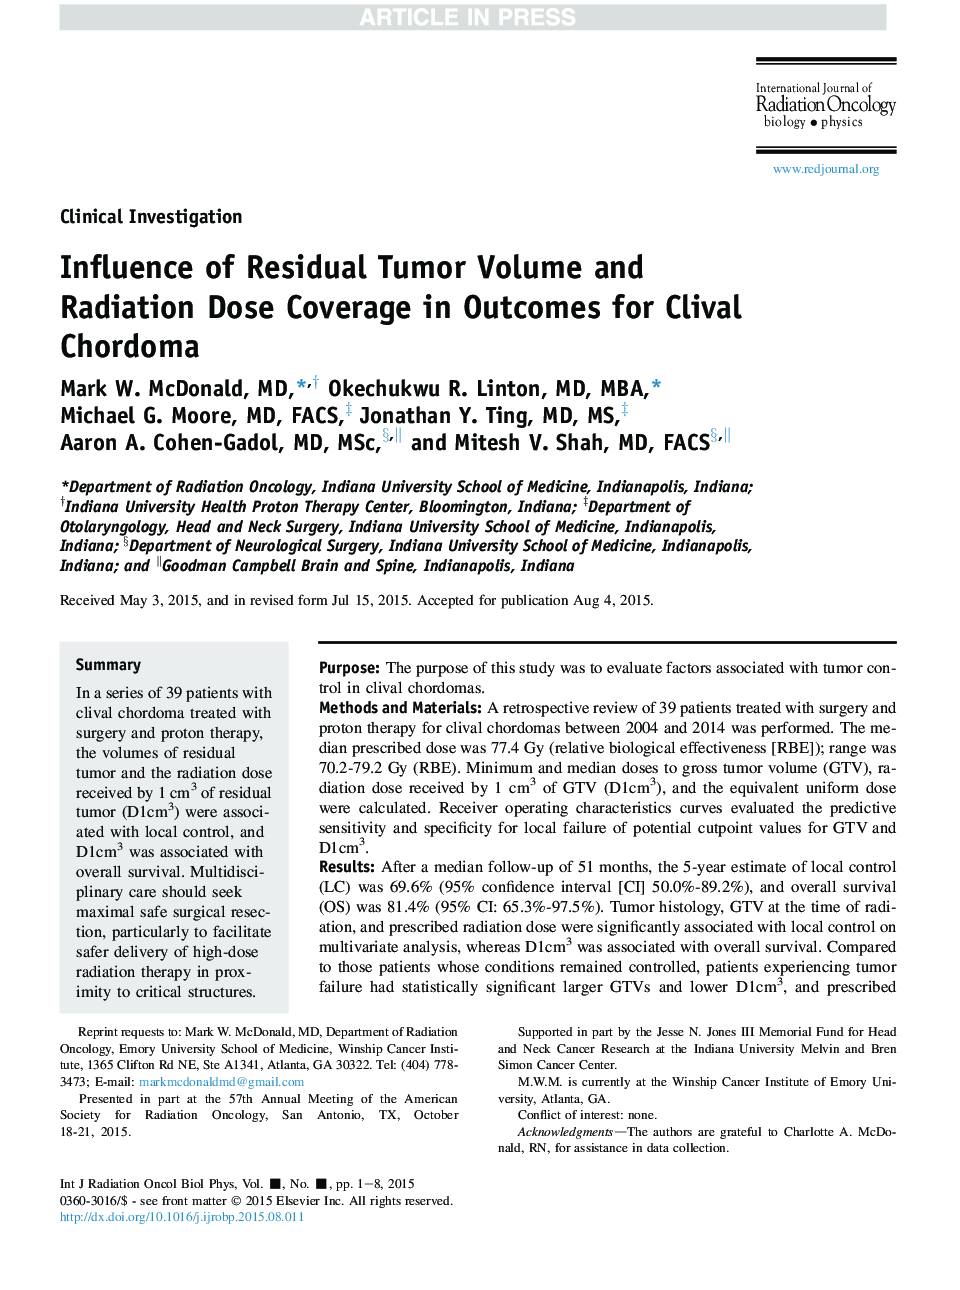 Influence of Residual Tumor Volume and Radiation Dose Coverage in Outcomes for Clival Chordoma